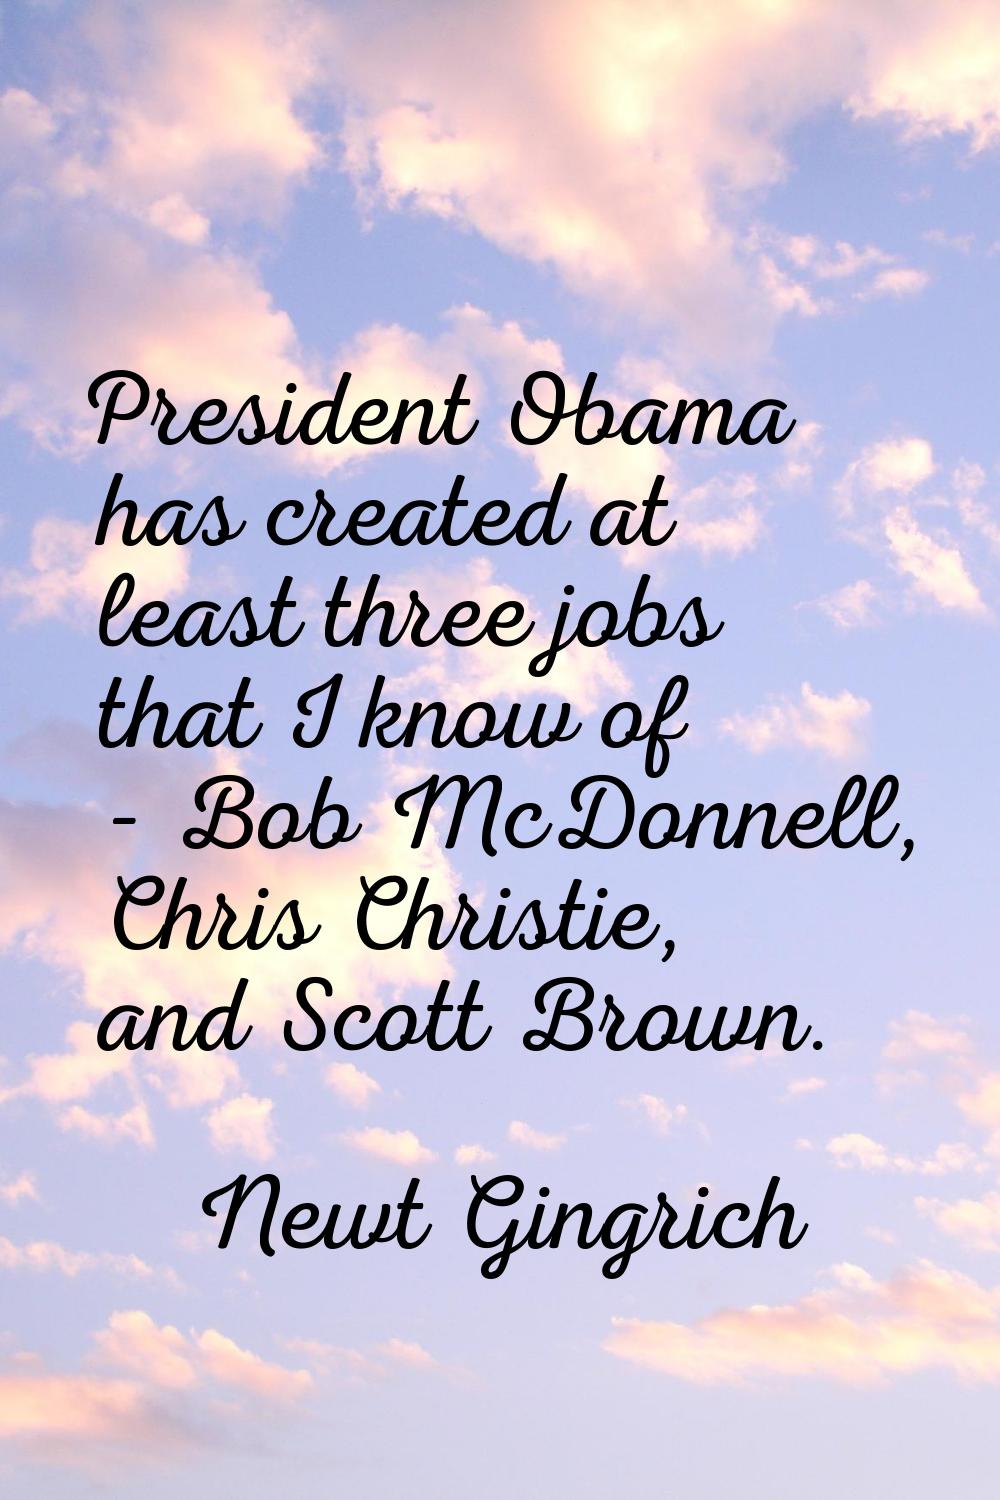 President Obama has created at least three jobs that I know of - Bob McDonnell, Chris Christie, and